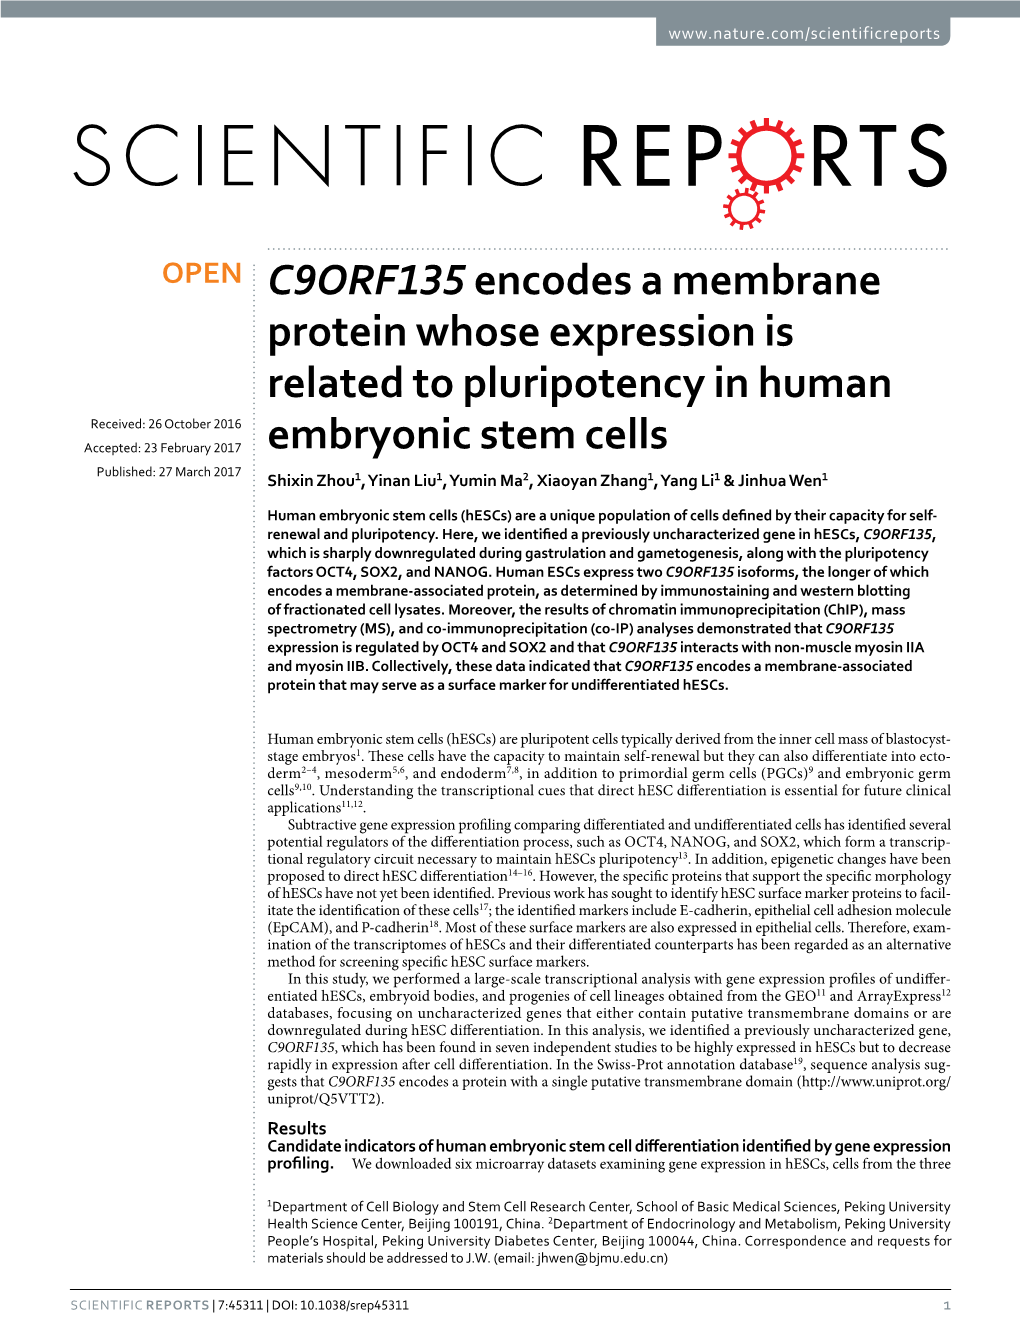 C9ORF135 Encodes a Membrane Protein Whose Expression Is Related to Pluripotency in Human Embryonic Stem Cells